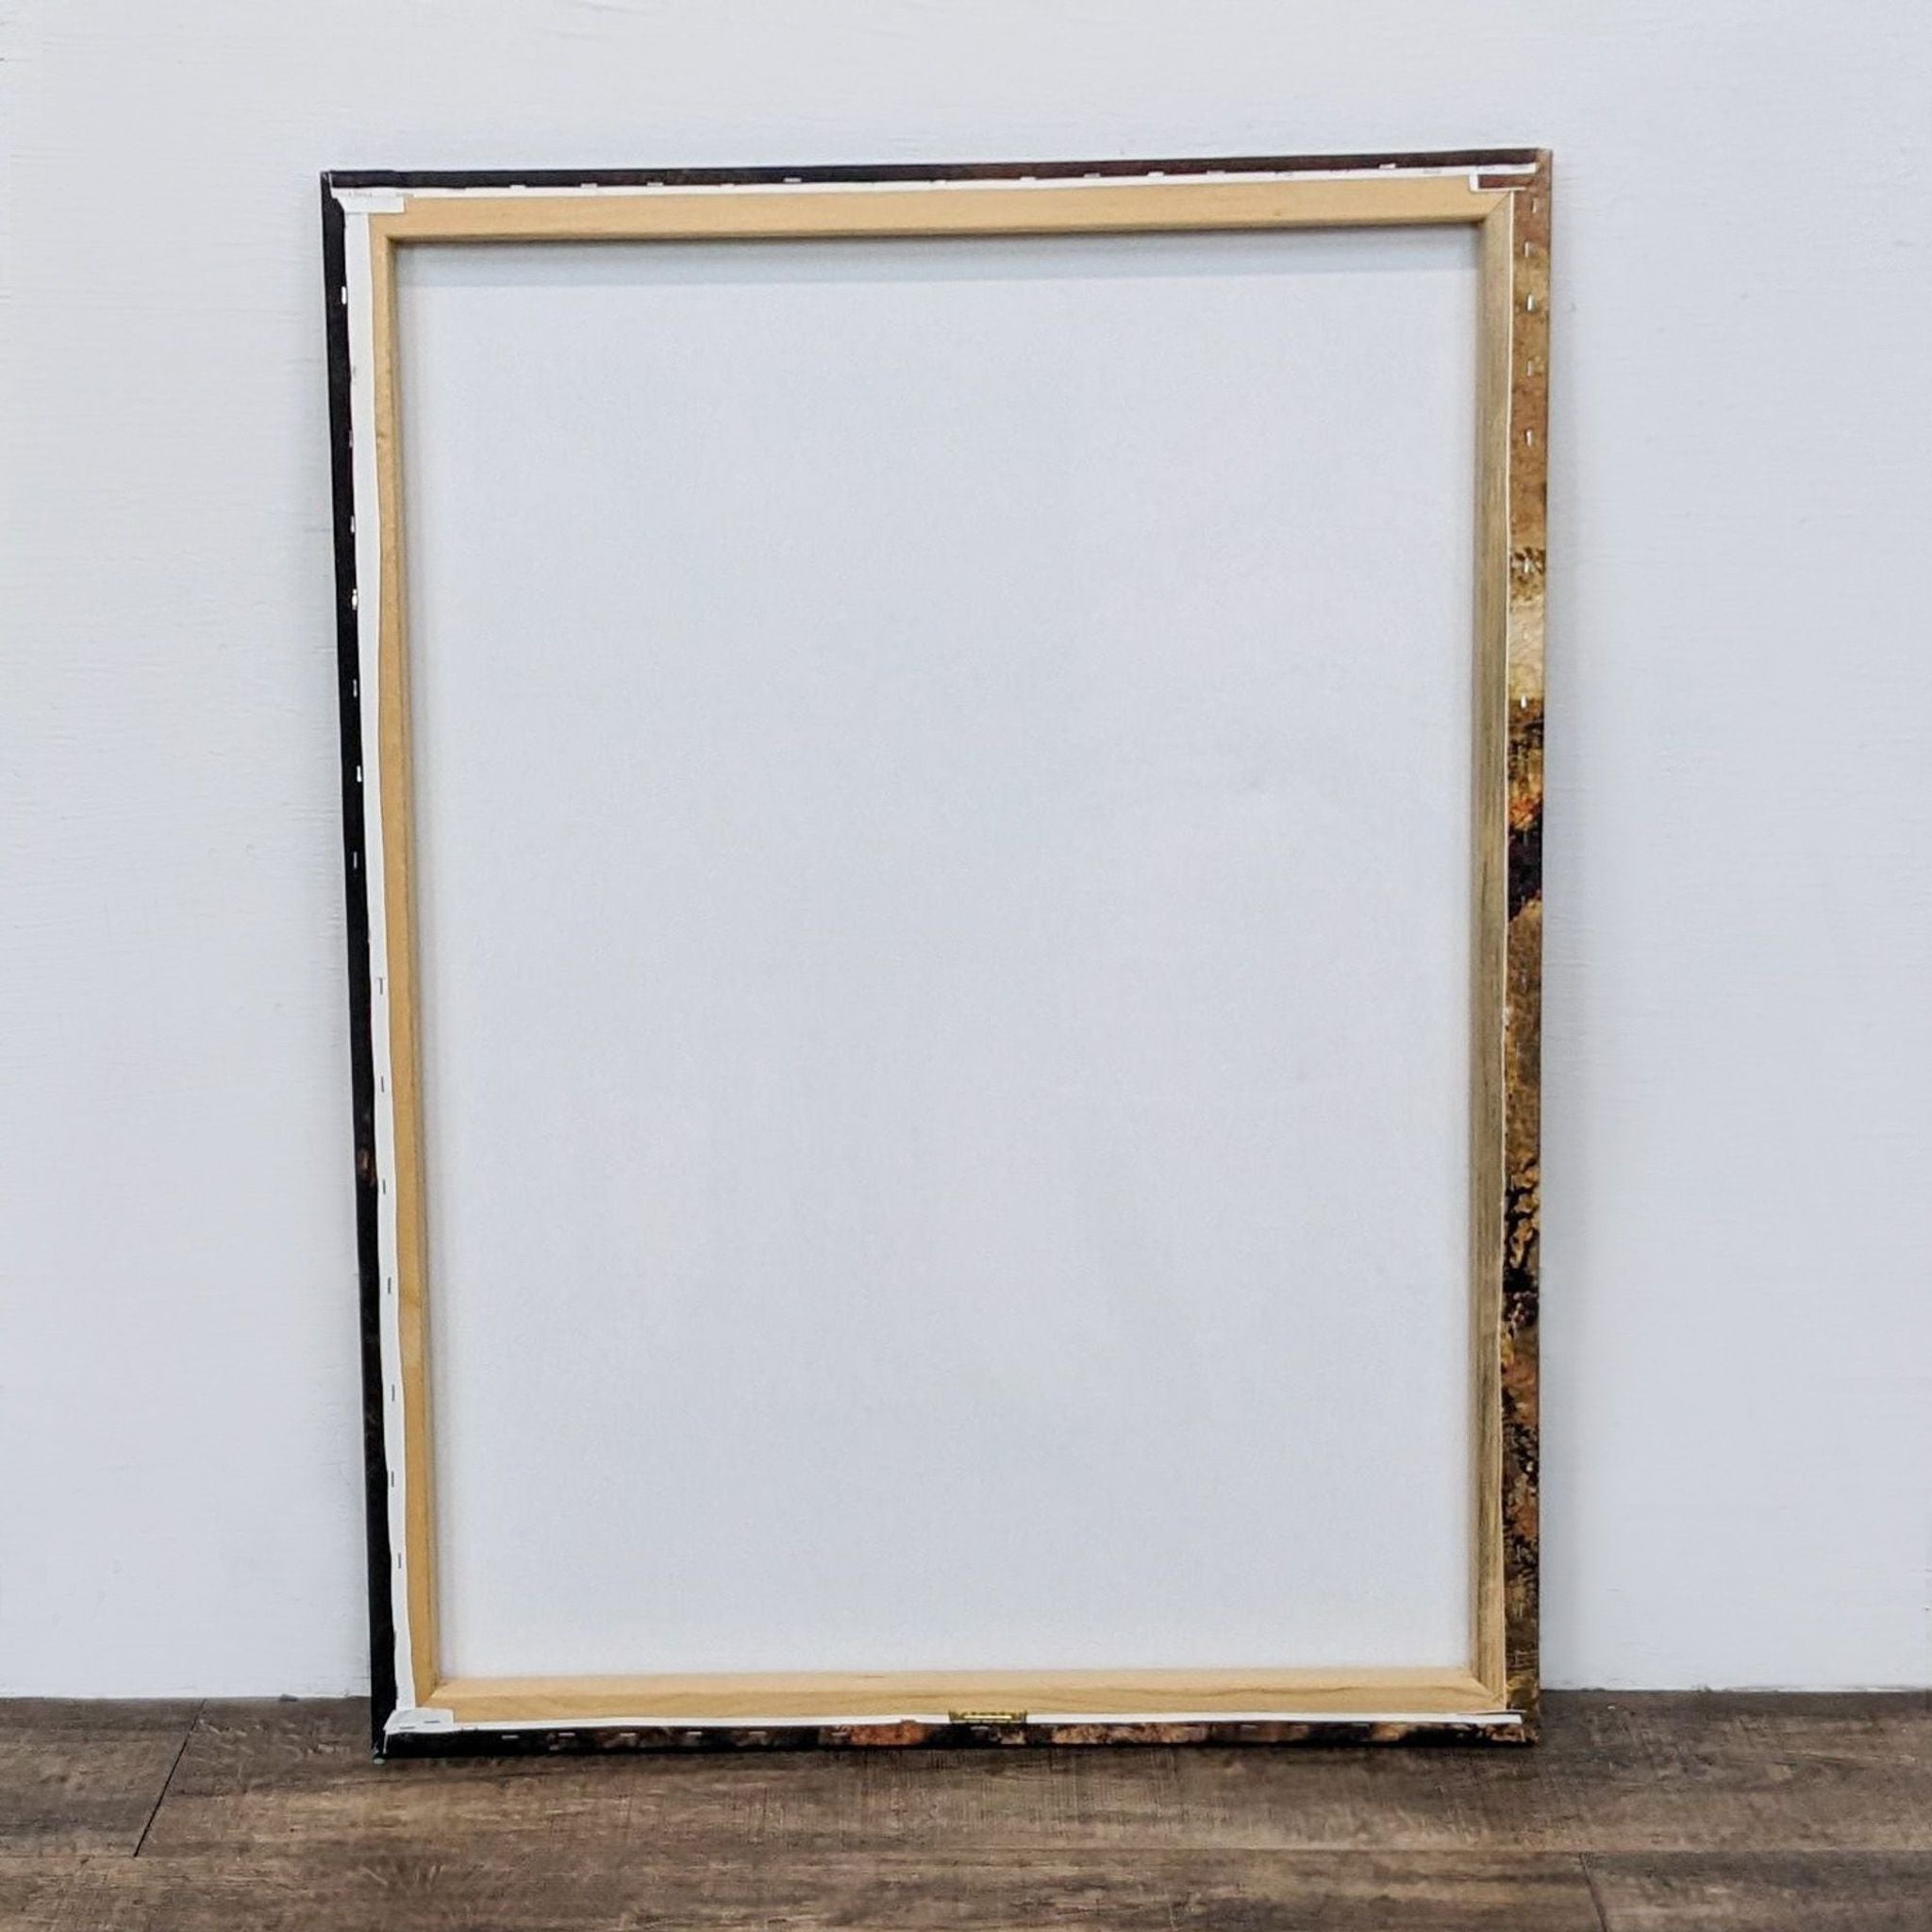 Back view of a Reperch canvas print showing the wooden frame and blank reverse side, standing against a white wall.